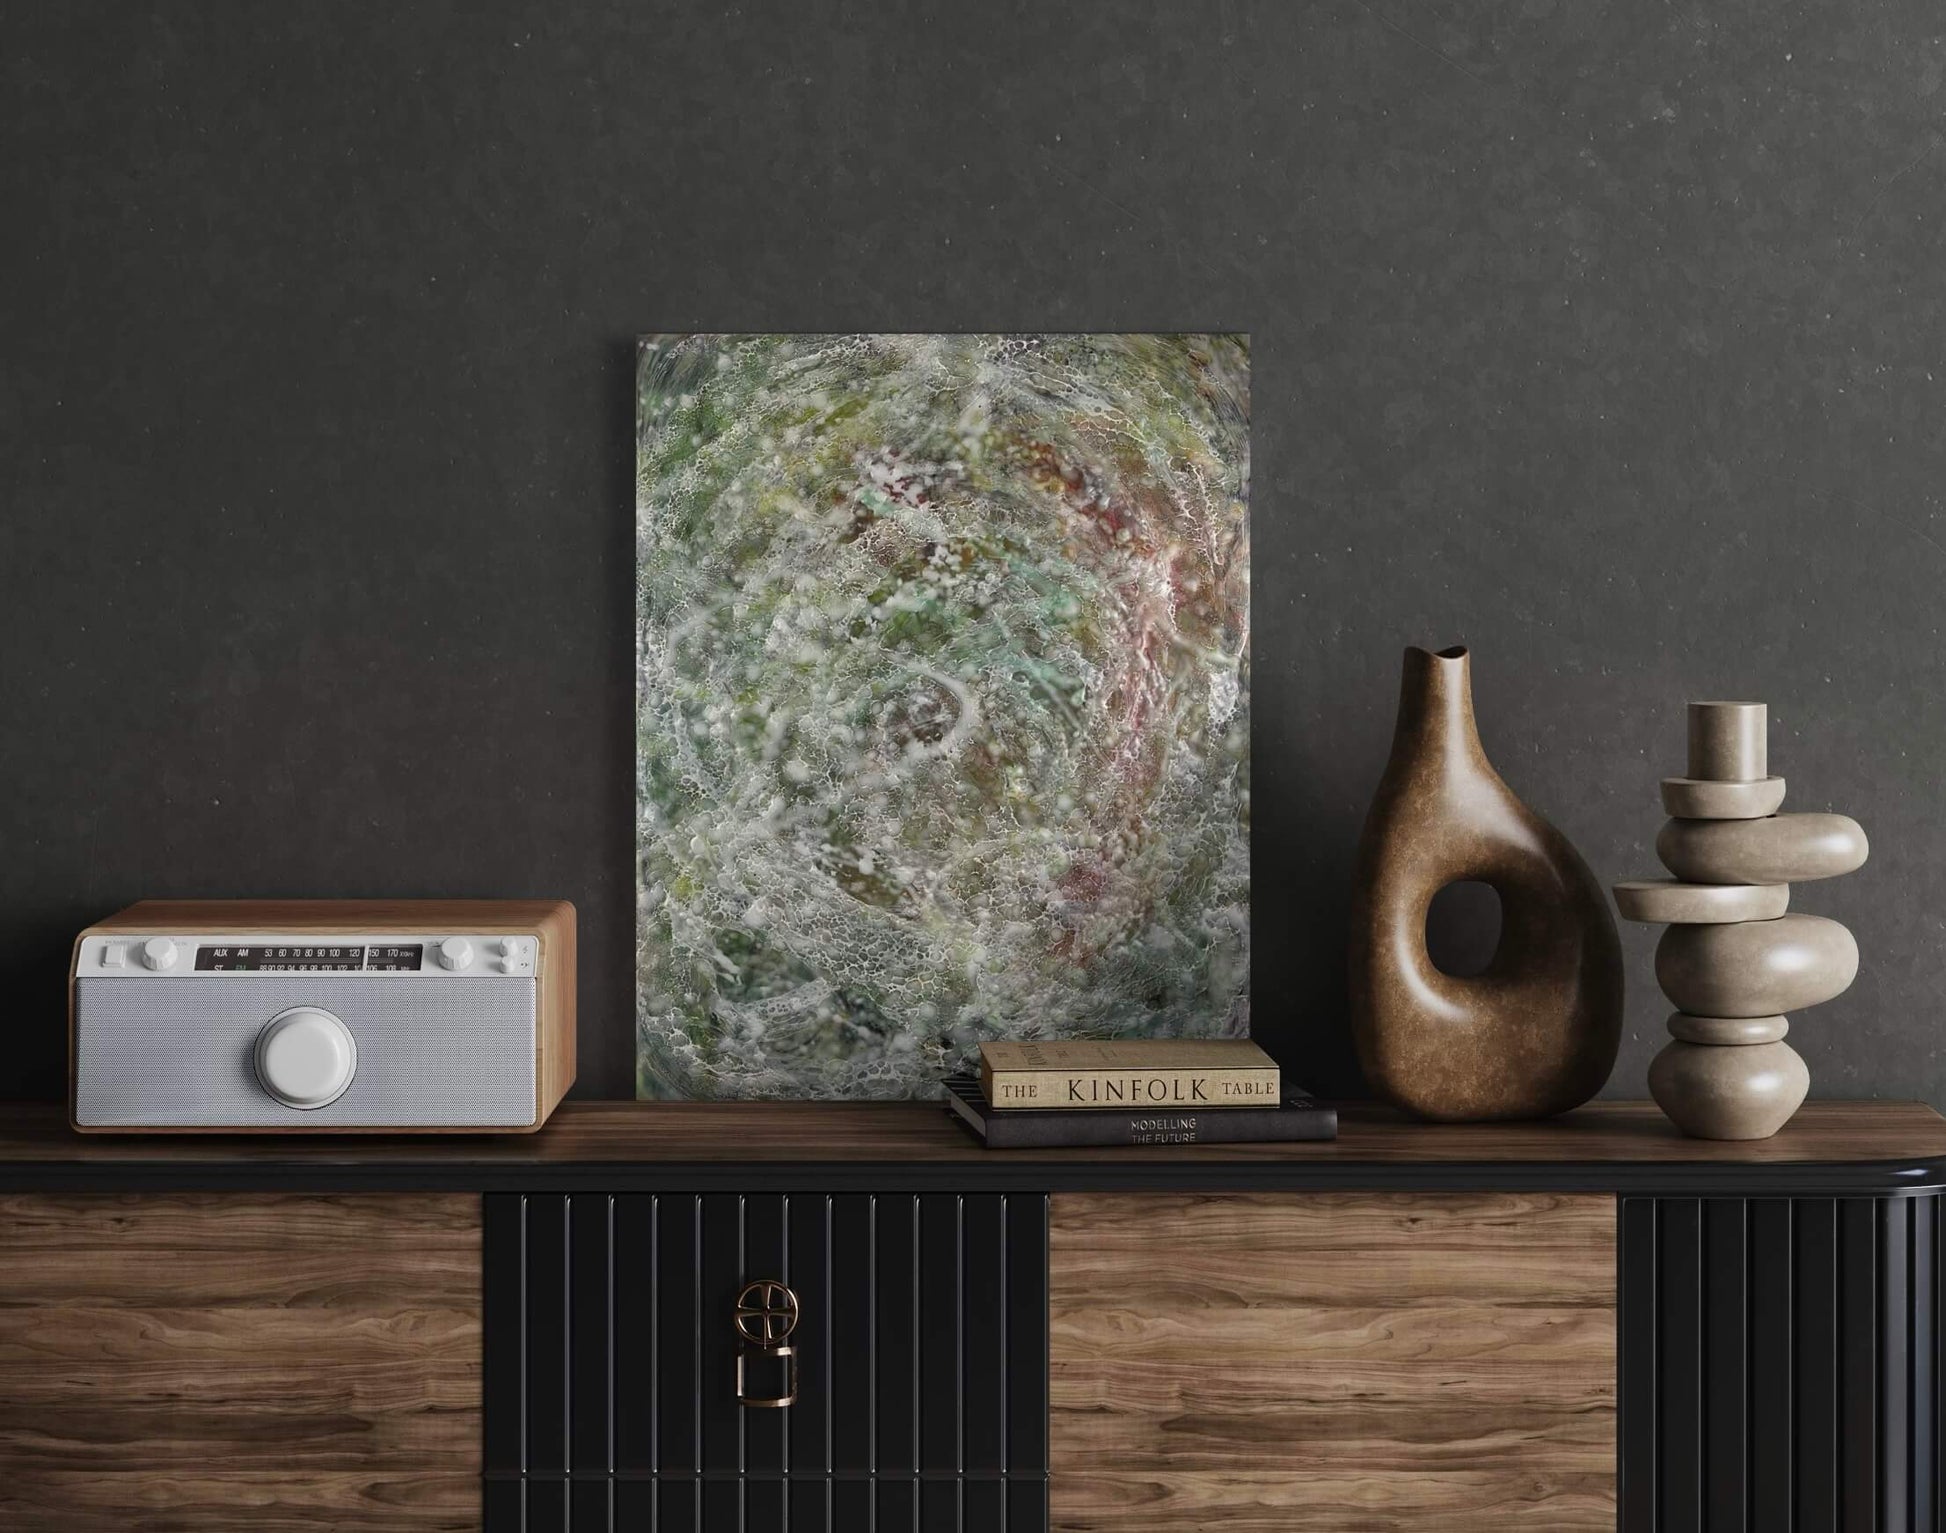 In situ.This painting has rippled texture with warm greens, orange, yellow and reds. Wispy lace-like texture of shellac creates movement within the painting.